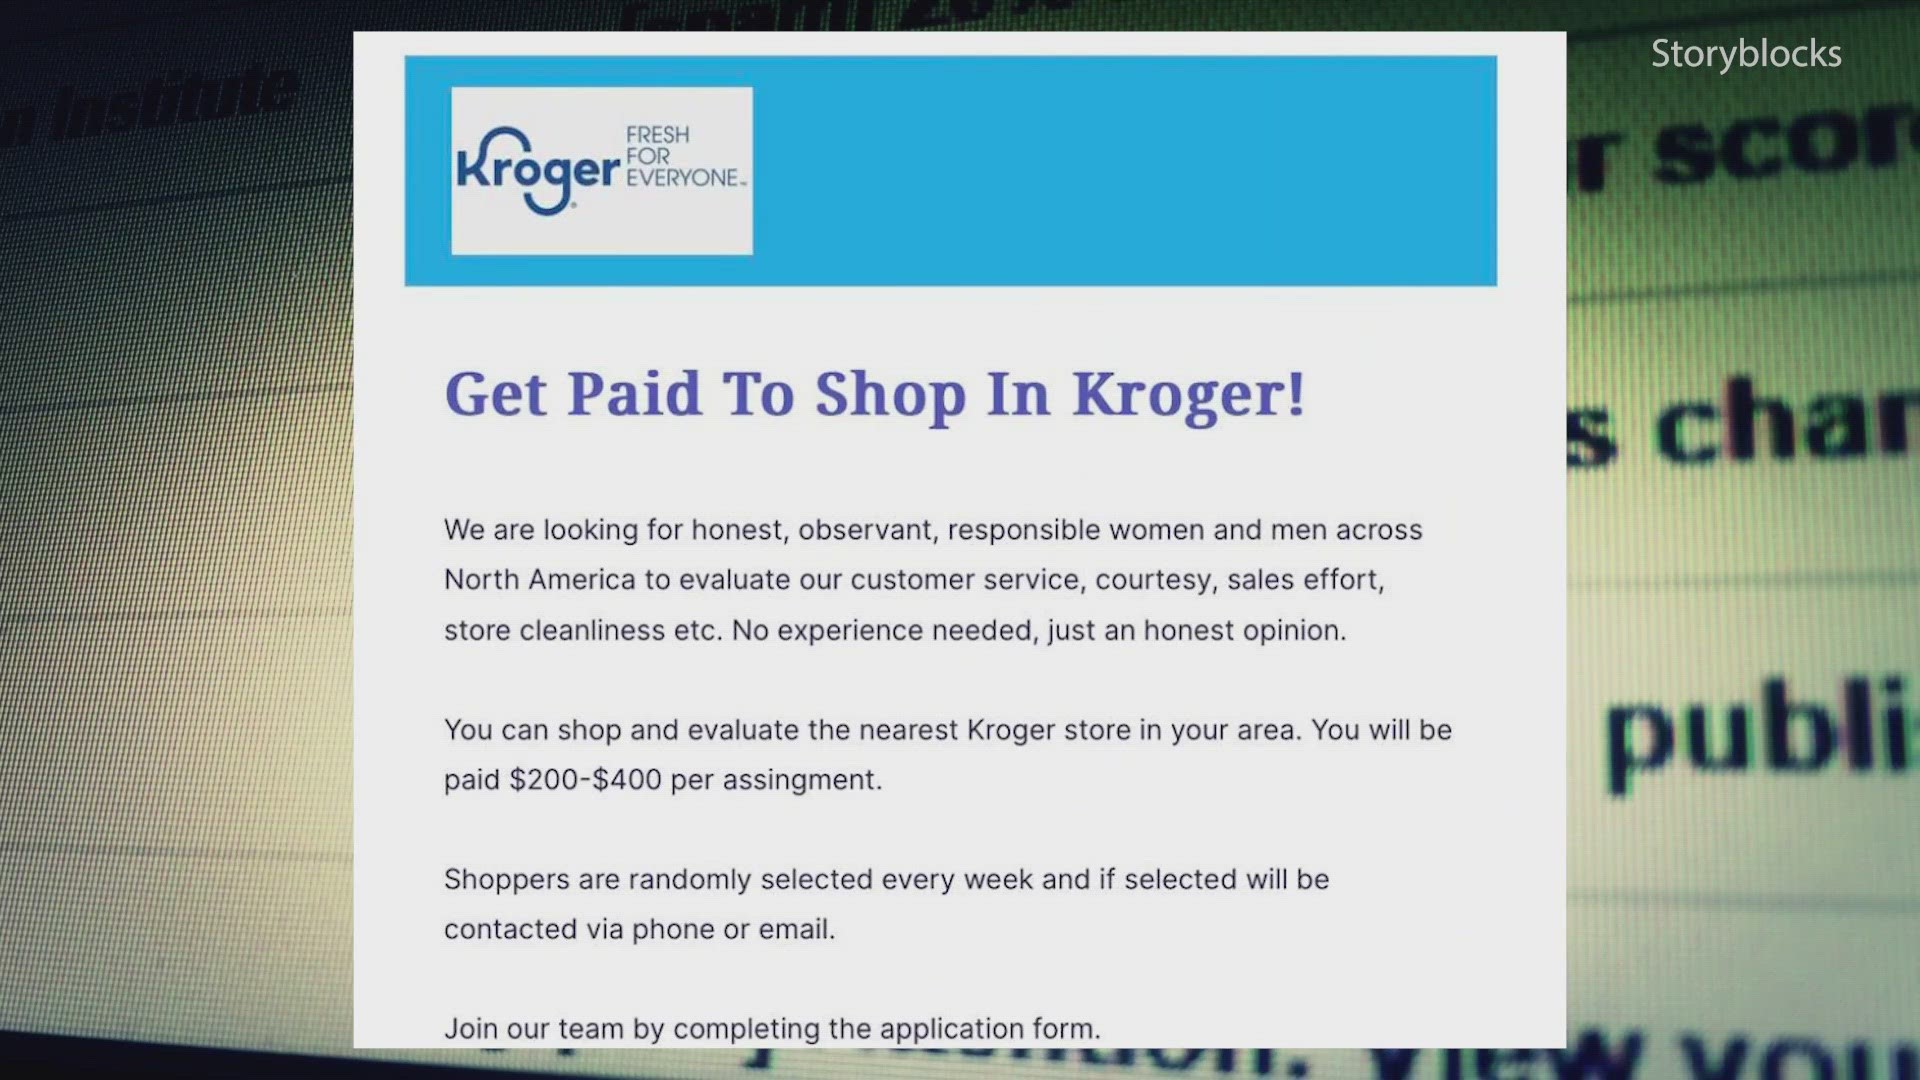 A viewer told the VIERFY team that they got an email from Kroger saying they could get up to $400 to be a secret shopper.